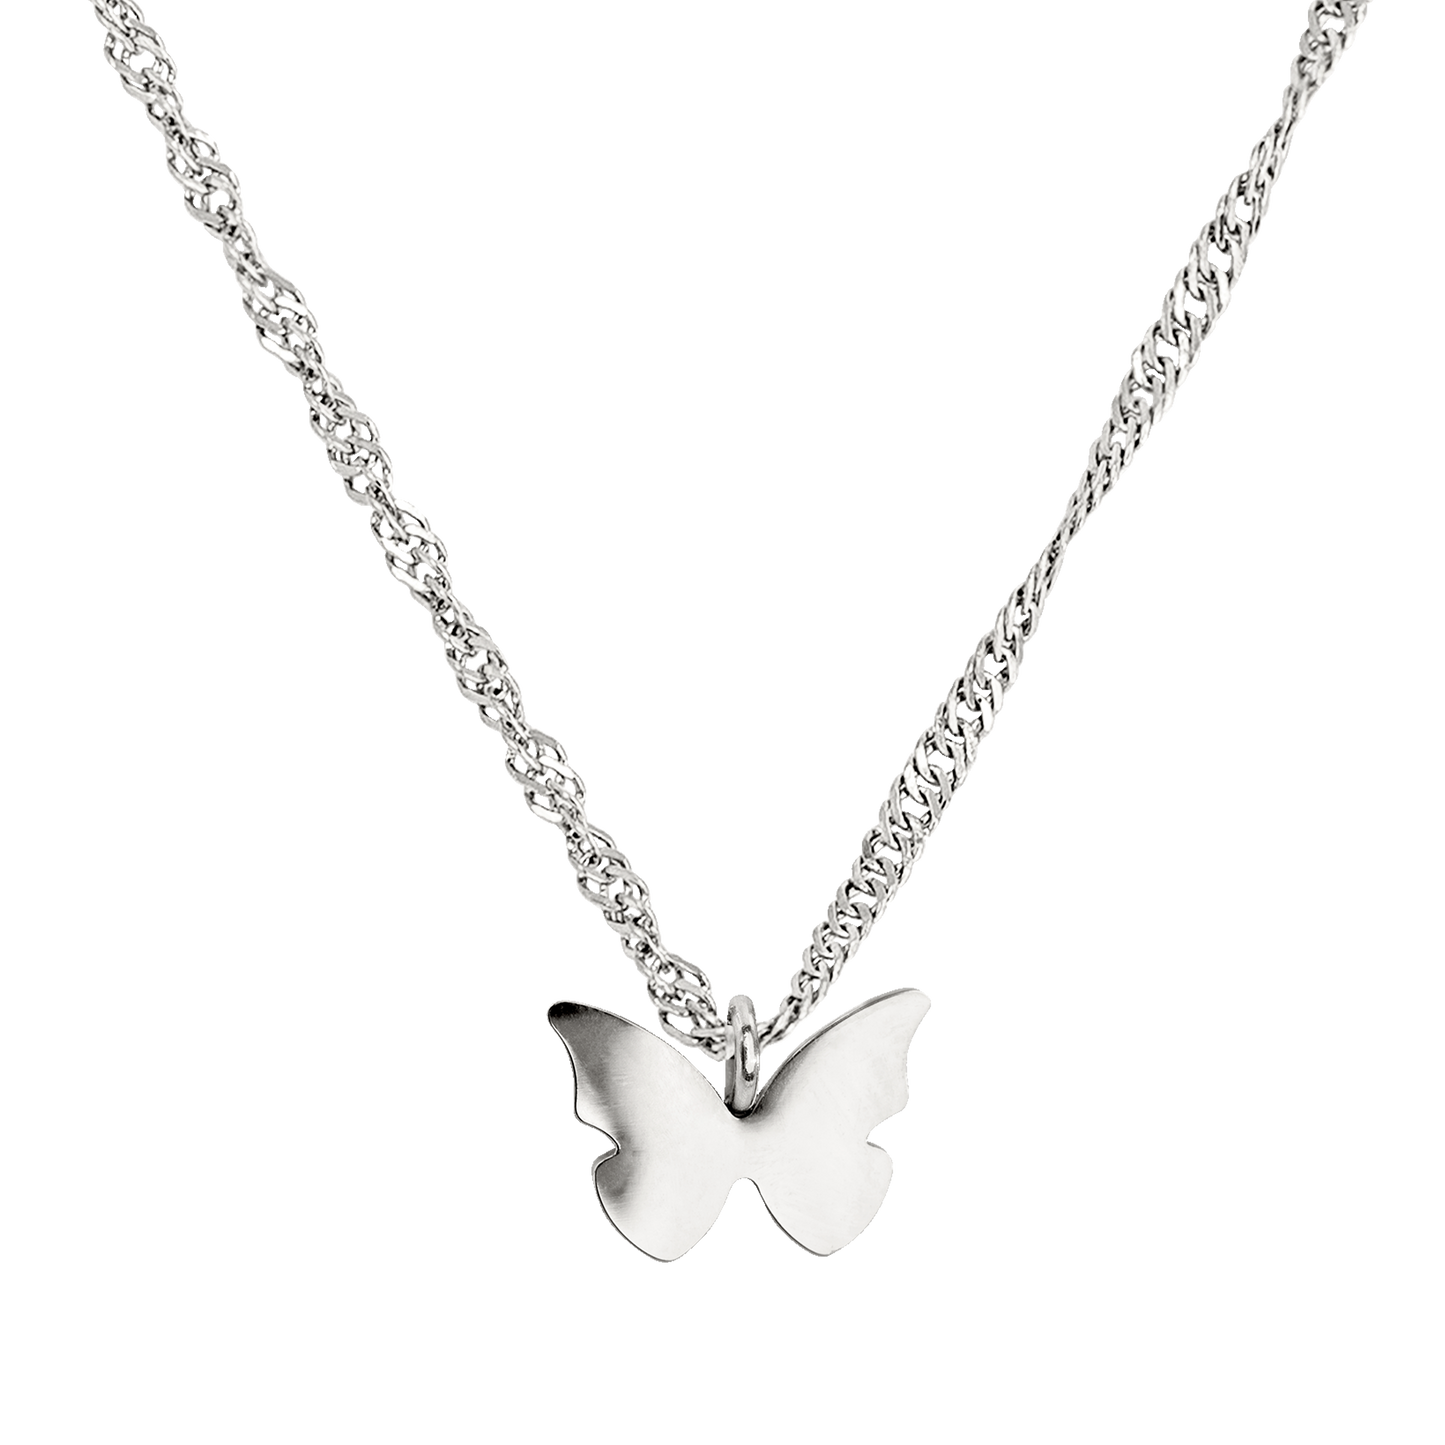 Flutterby Necklace Silver